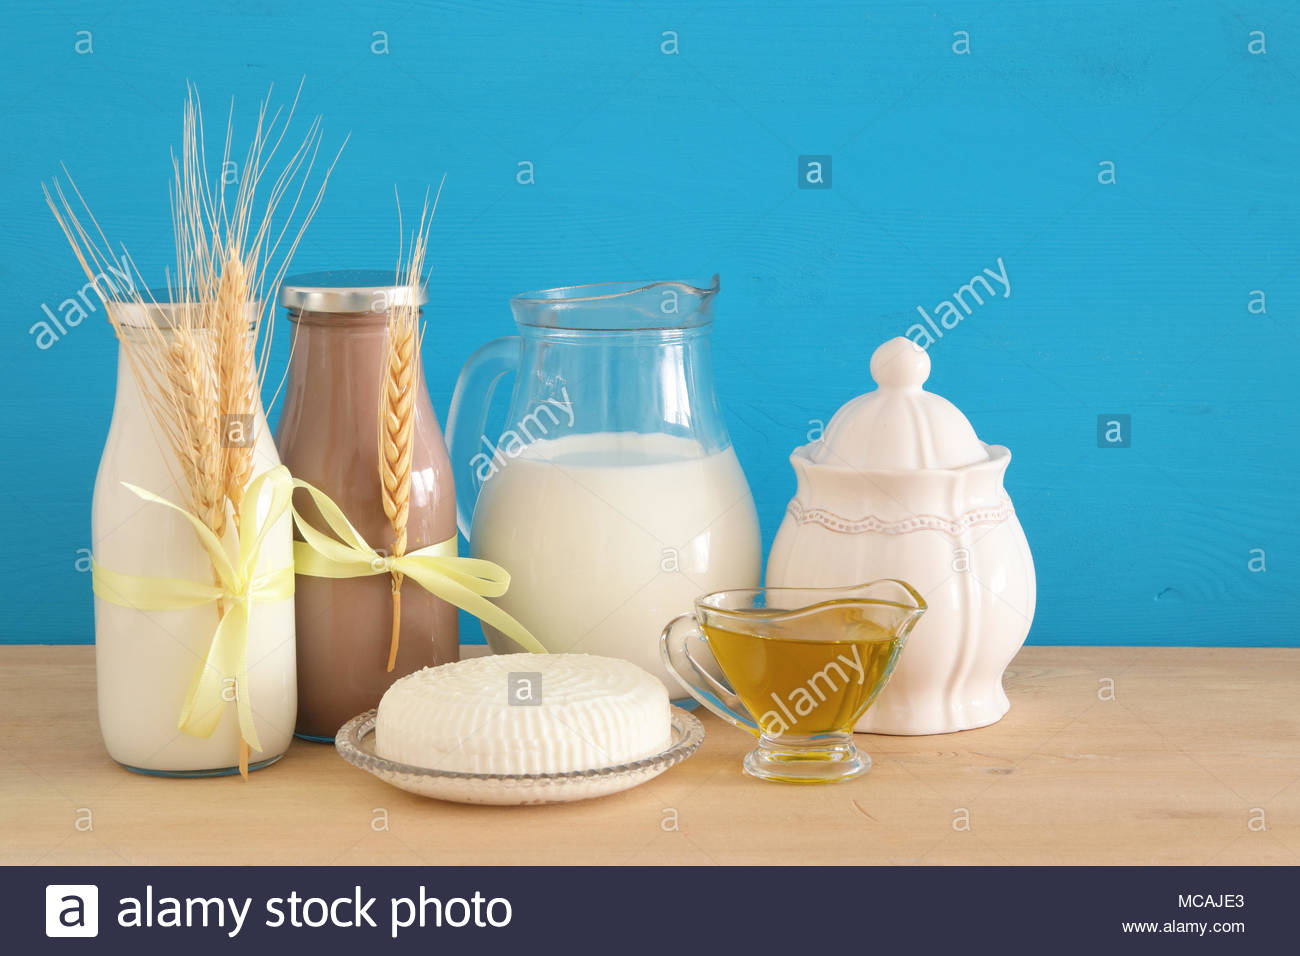 Image Of Dairy Products Over Wooden Background Symbols Jewish